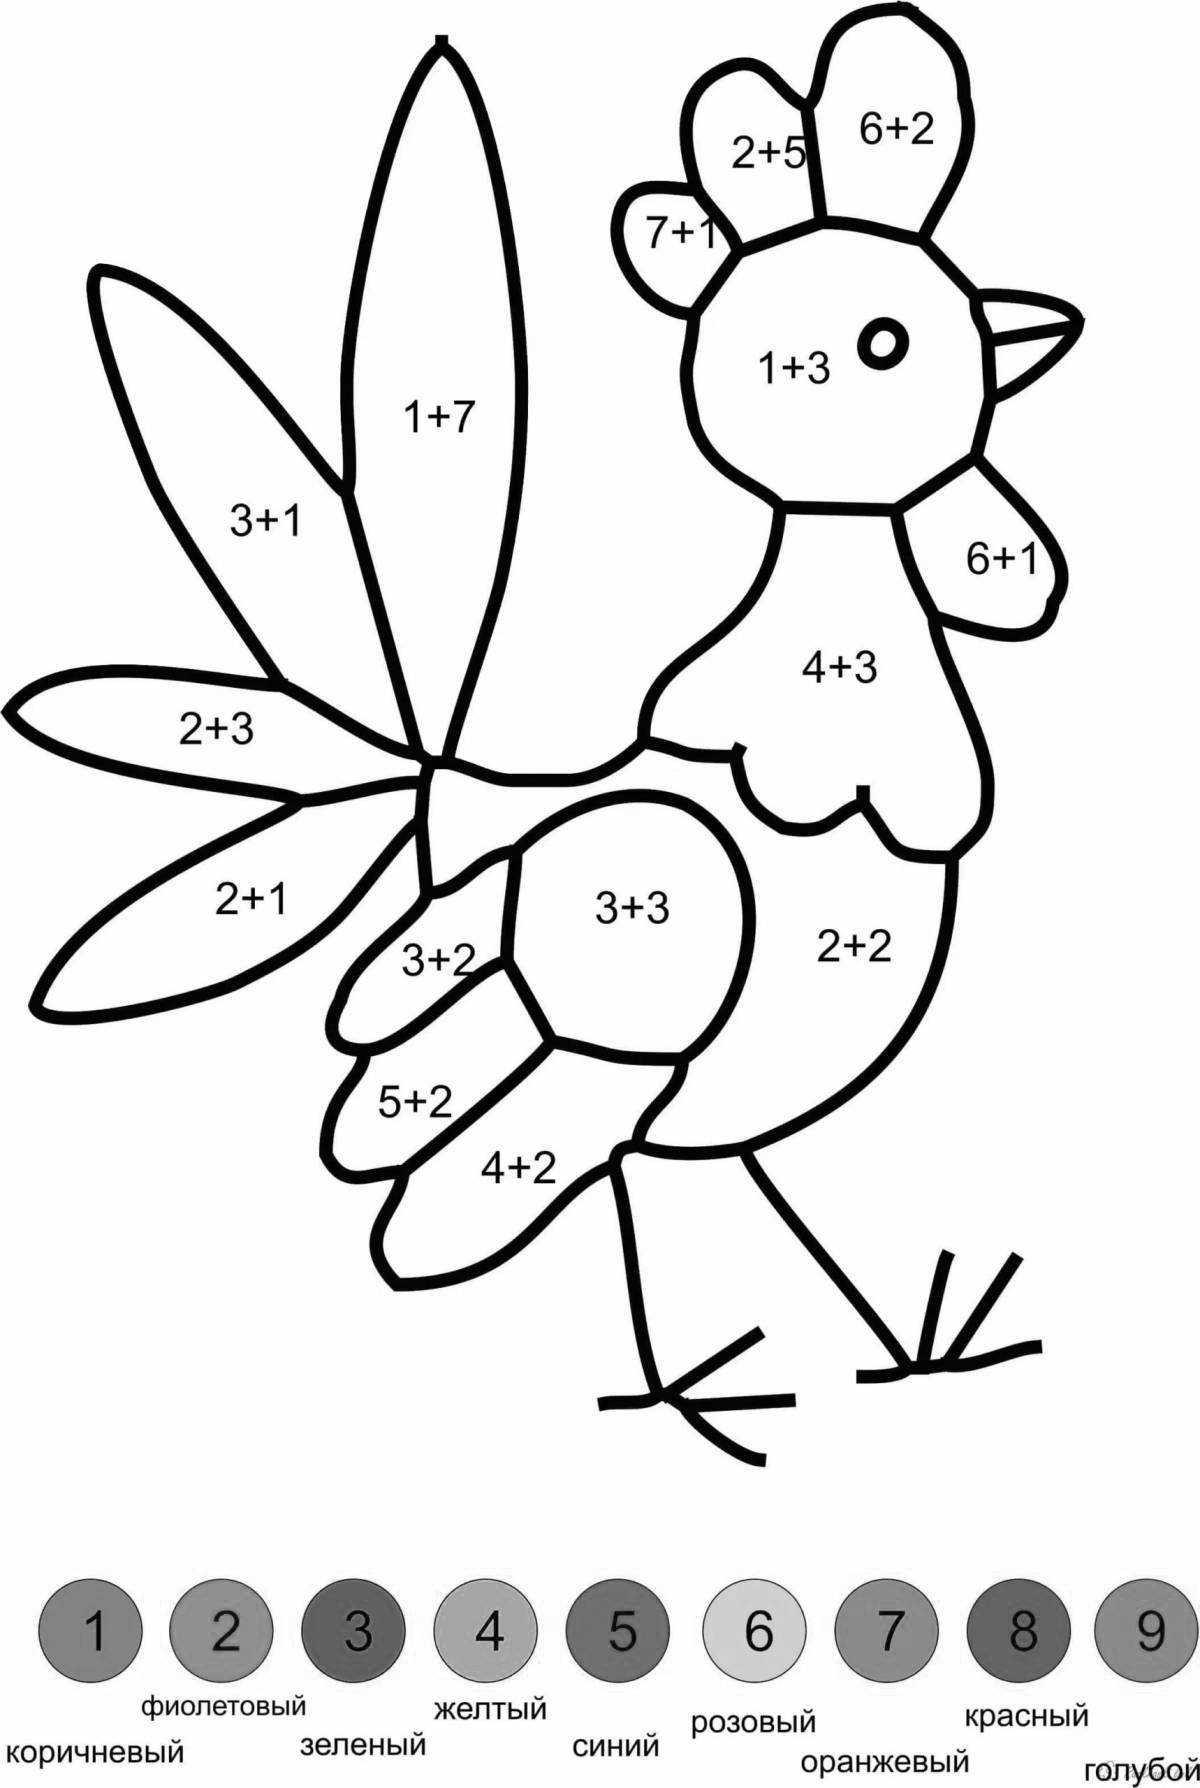 Educational coloring book with math examples